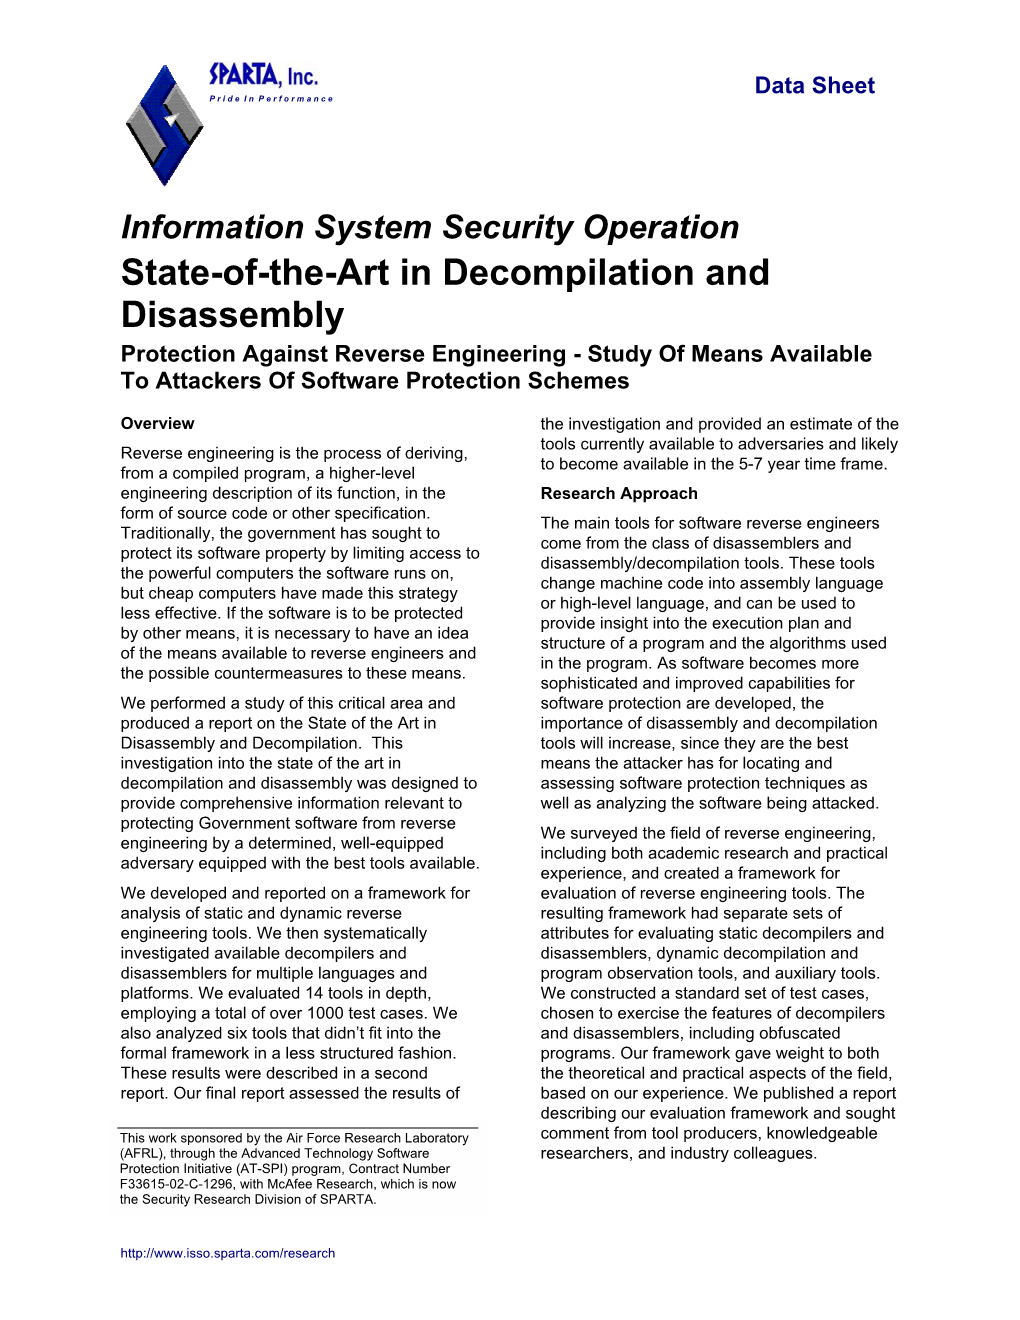 State-Of-The-Art in Decompilation and Disassembly Protection Against Reverse Engineering - Study of Means Available to Attackers of Software Protection Schemes